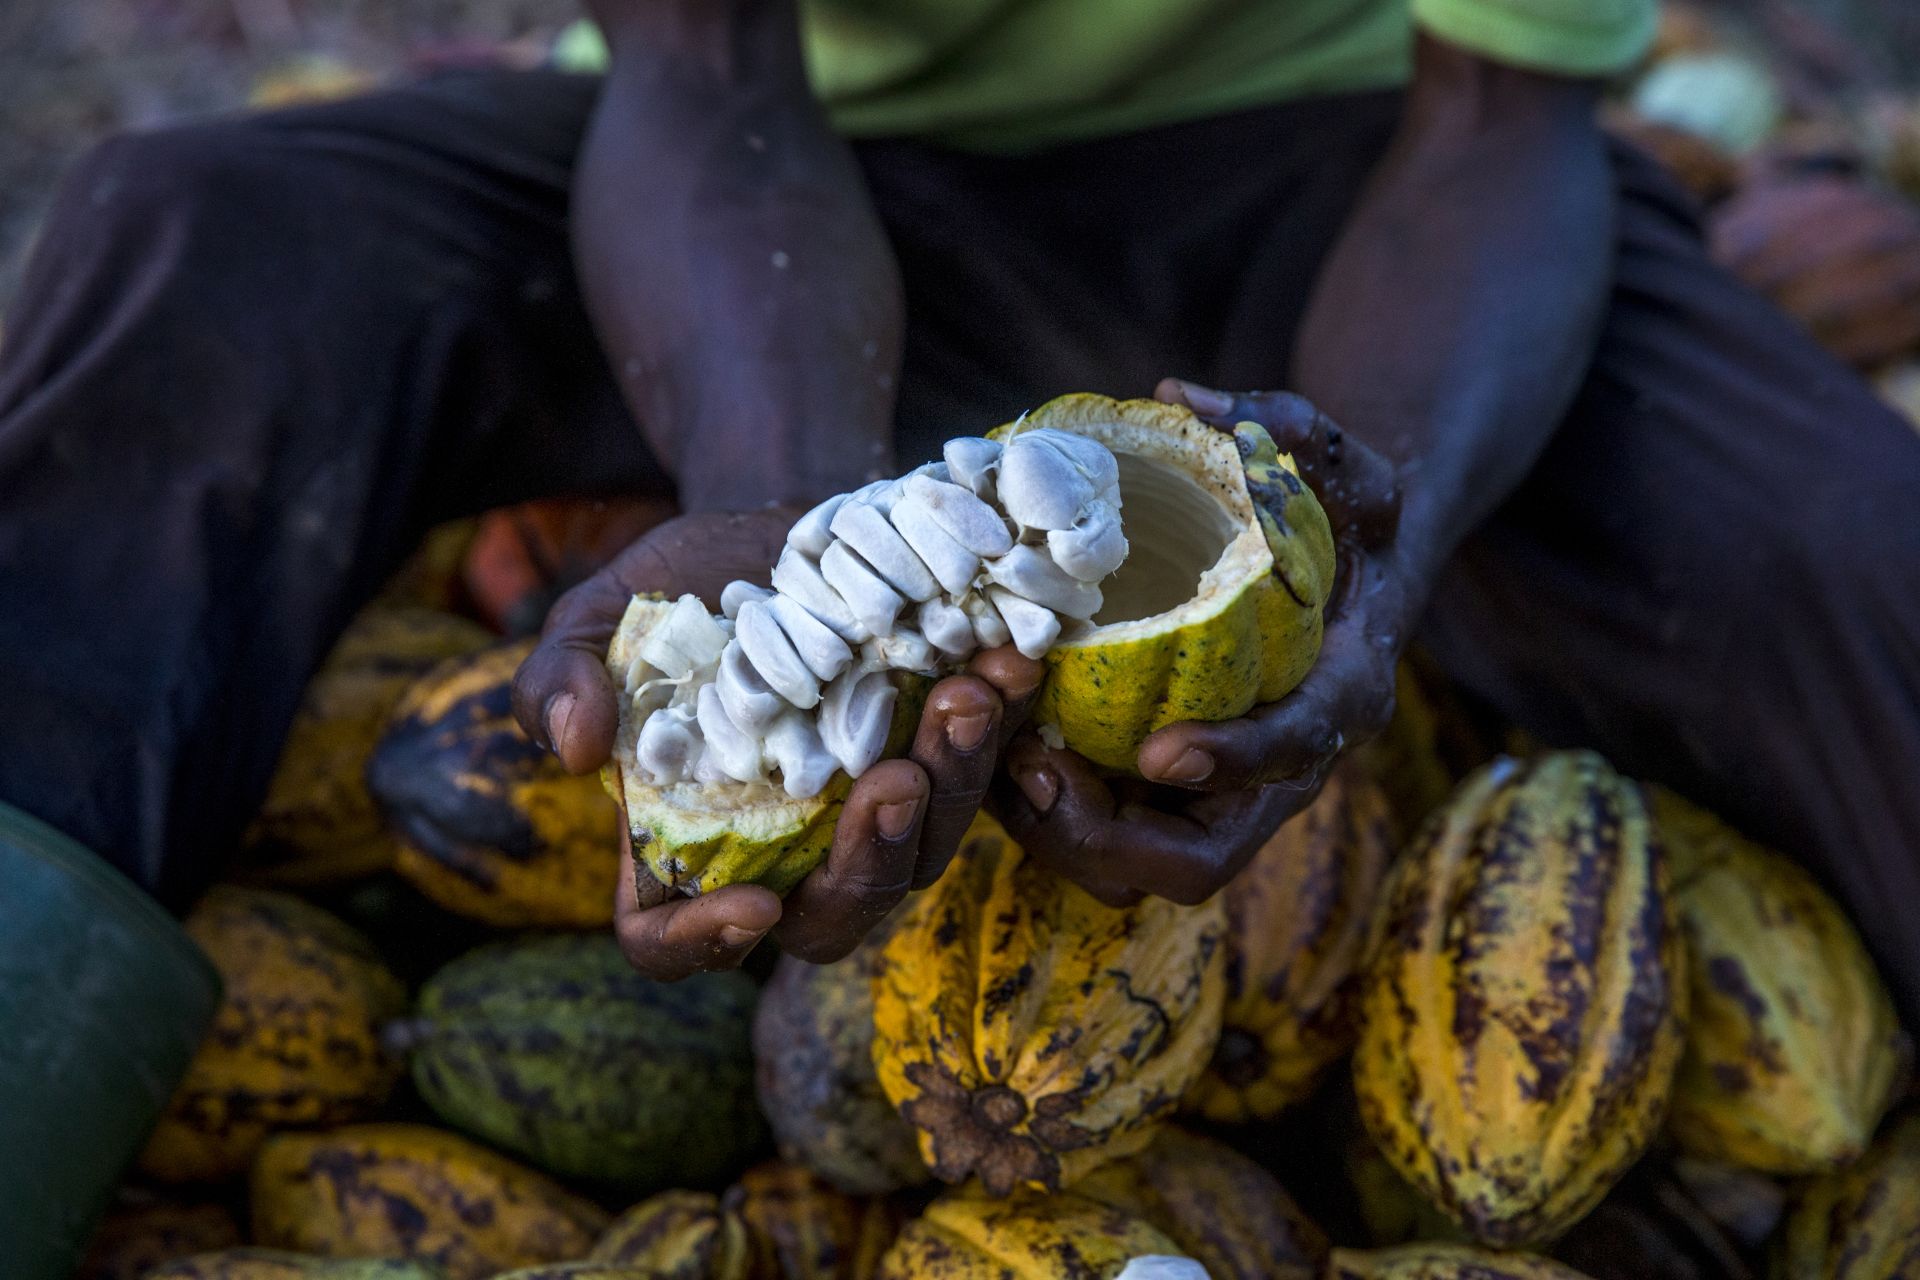 Ivory Coast’s Crackdown on Child Labor Clashes With the Realities of Cocoa Farming